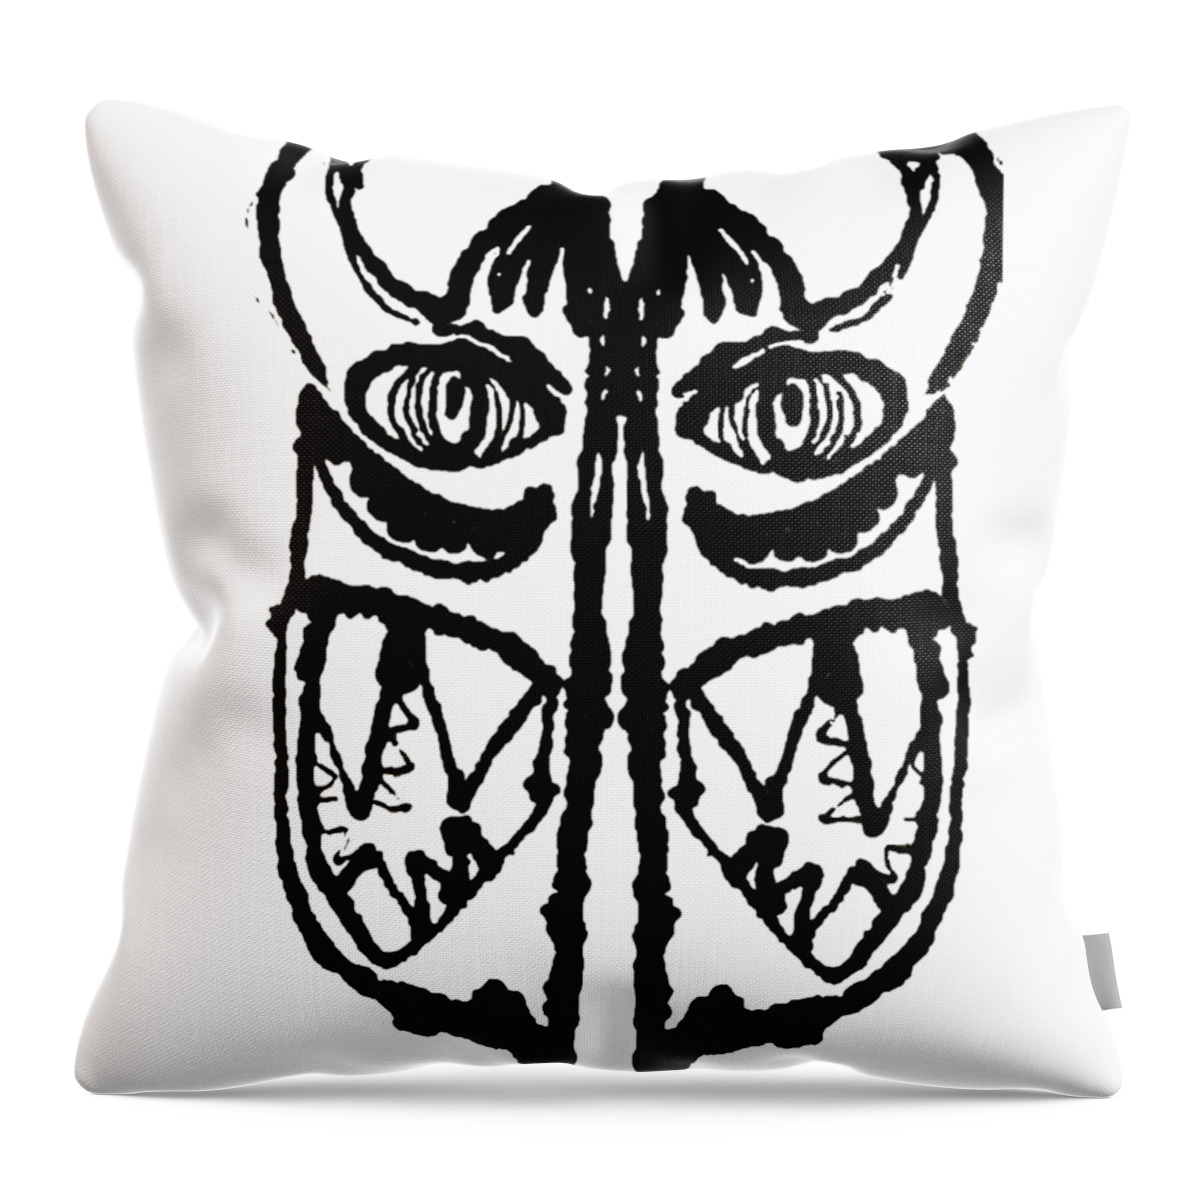 Abstract Throw Pillow featuring the painting Mask by Stephenie Zagorski